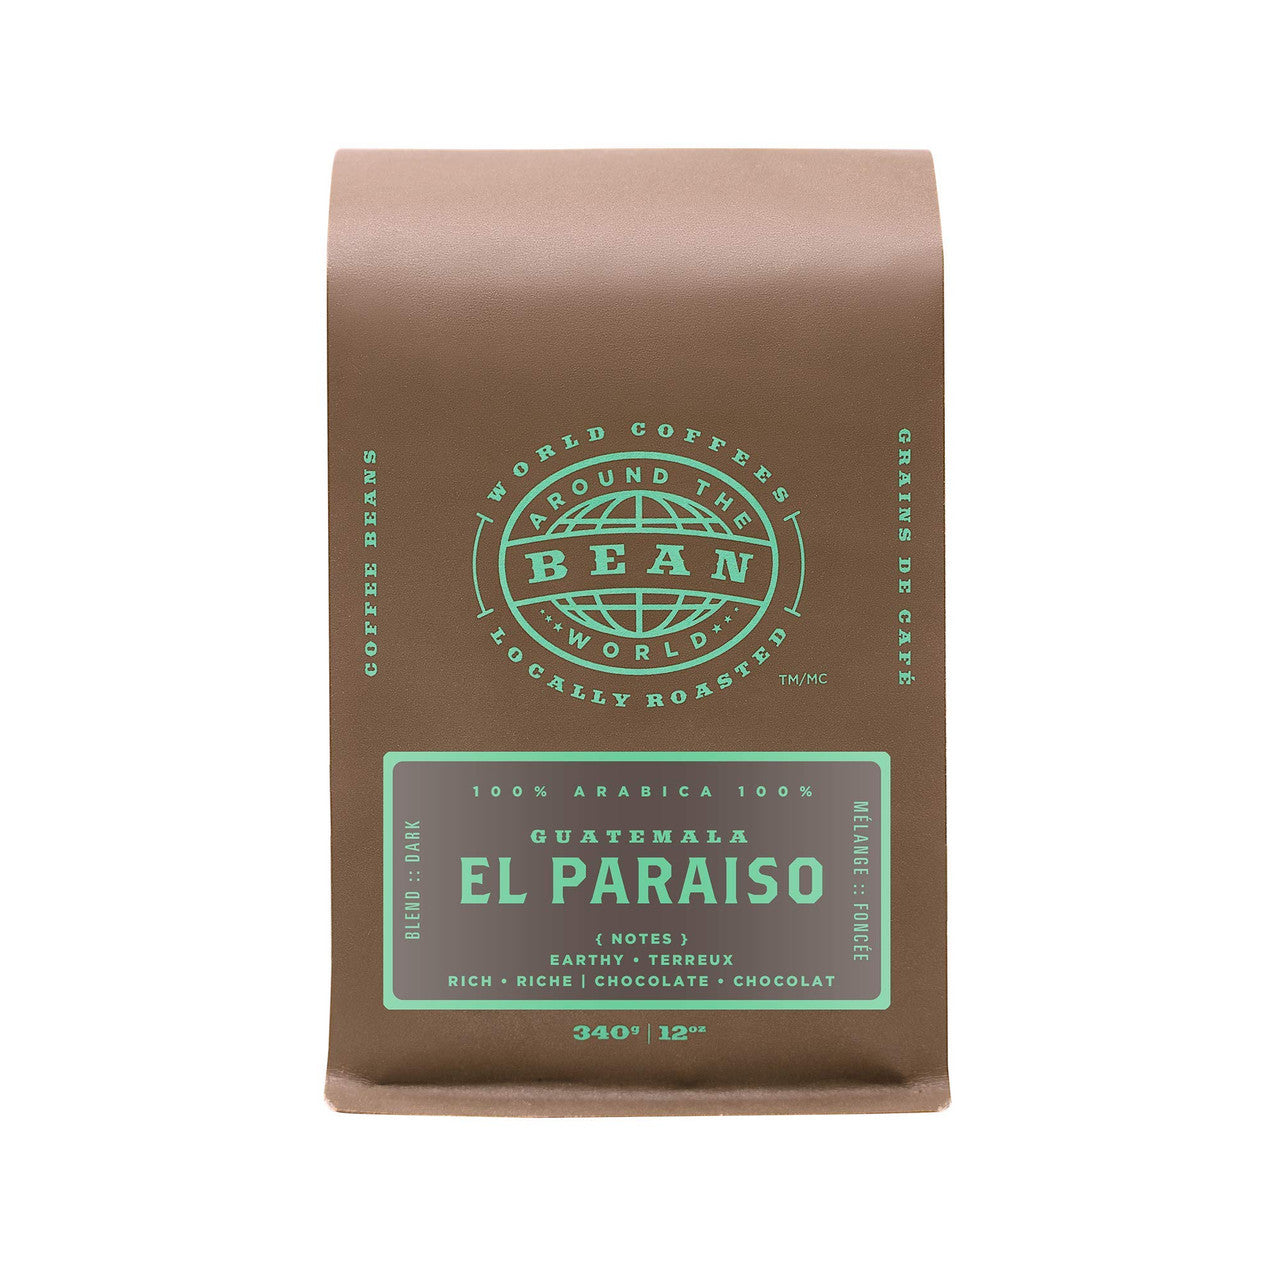 Bean Around The World Coffees El Paraiso Coffee, 400g/12 oz., {Imported from Canada}